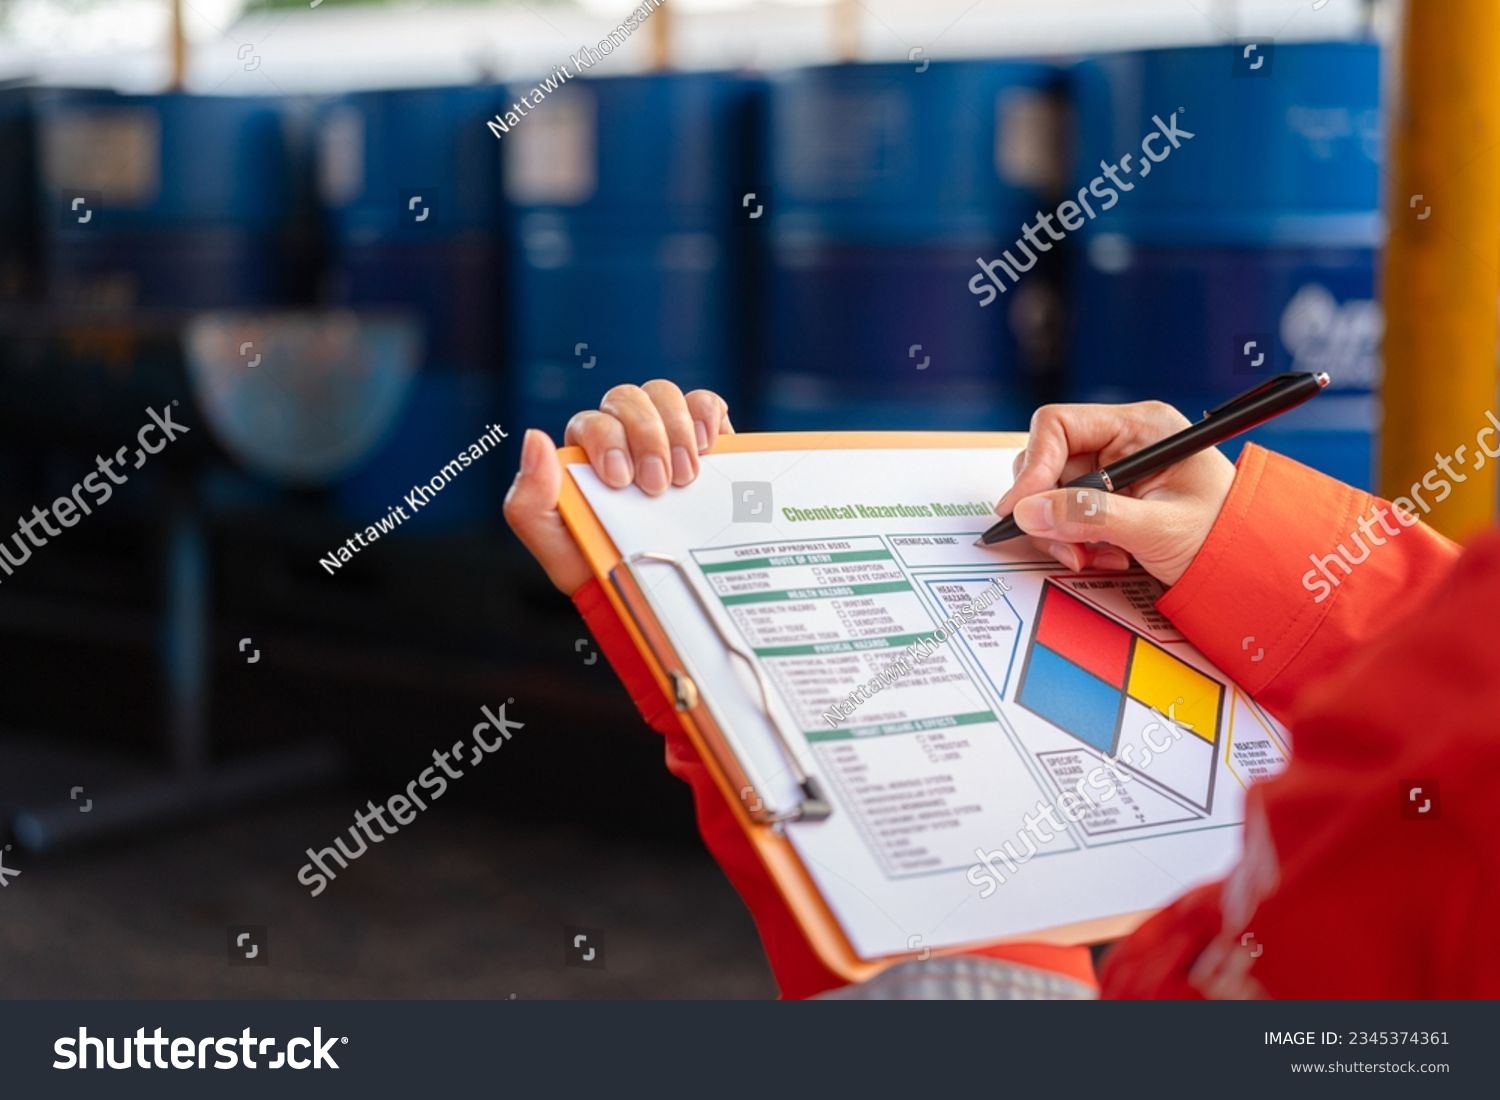 A safety officer is checking on the hazardous material checklist form with chemical storage area at the factory as background. Industrial safety working scene, selective focus. #2345374361